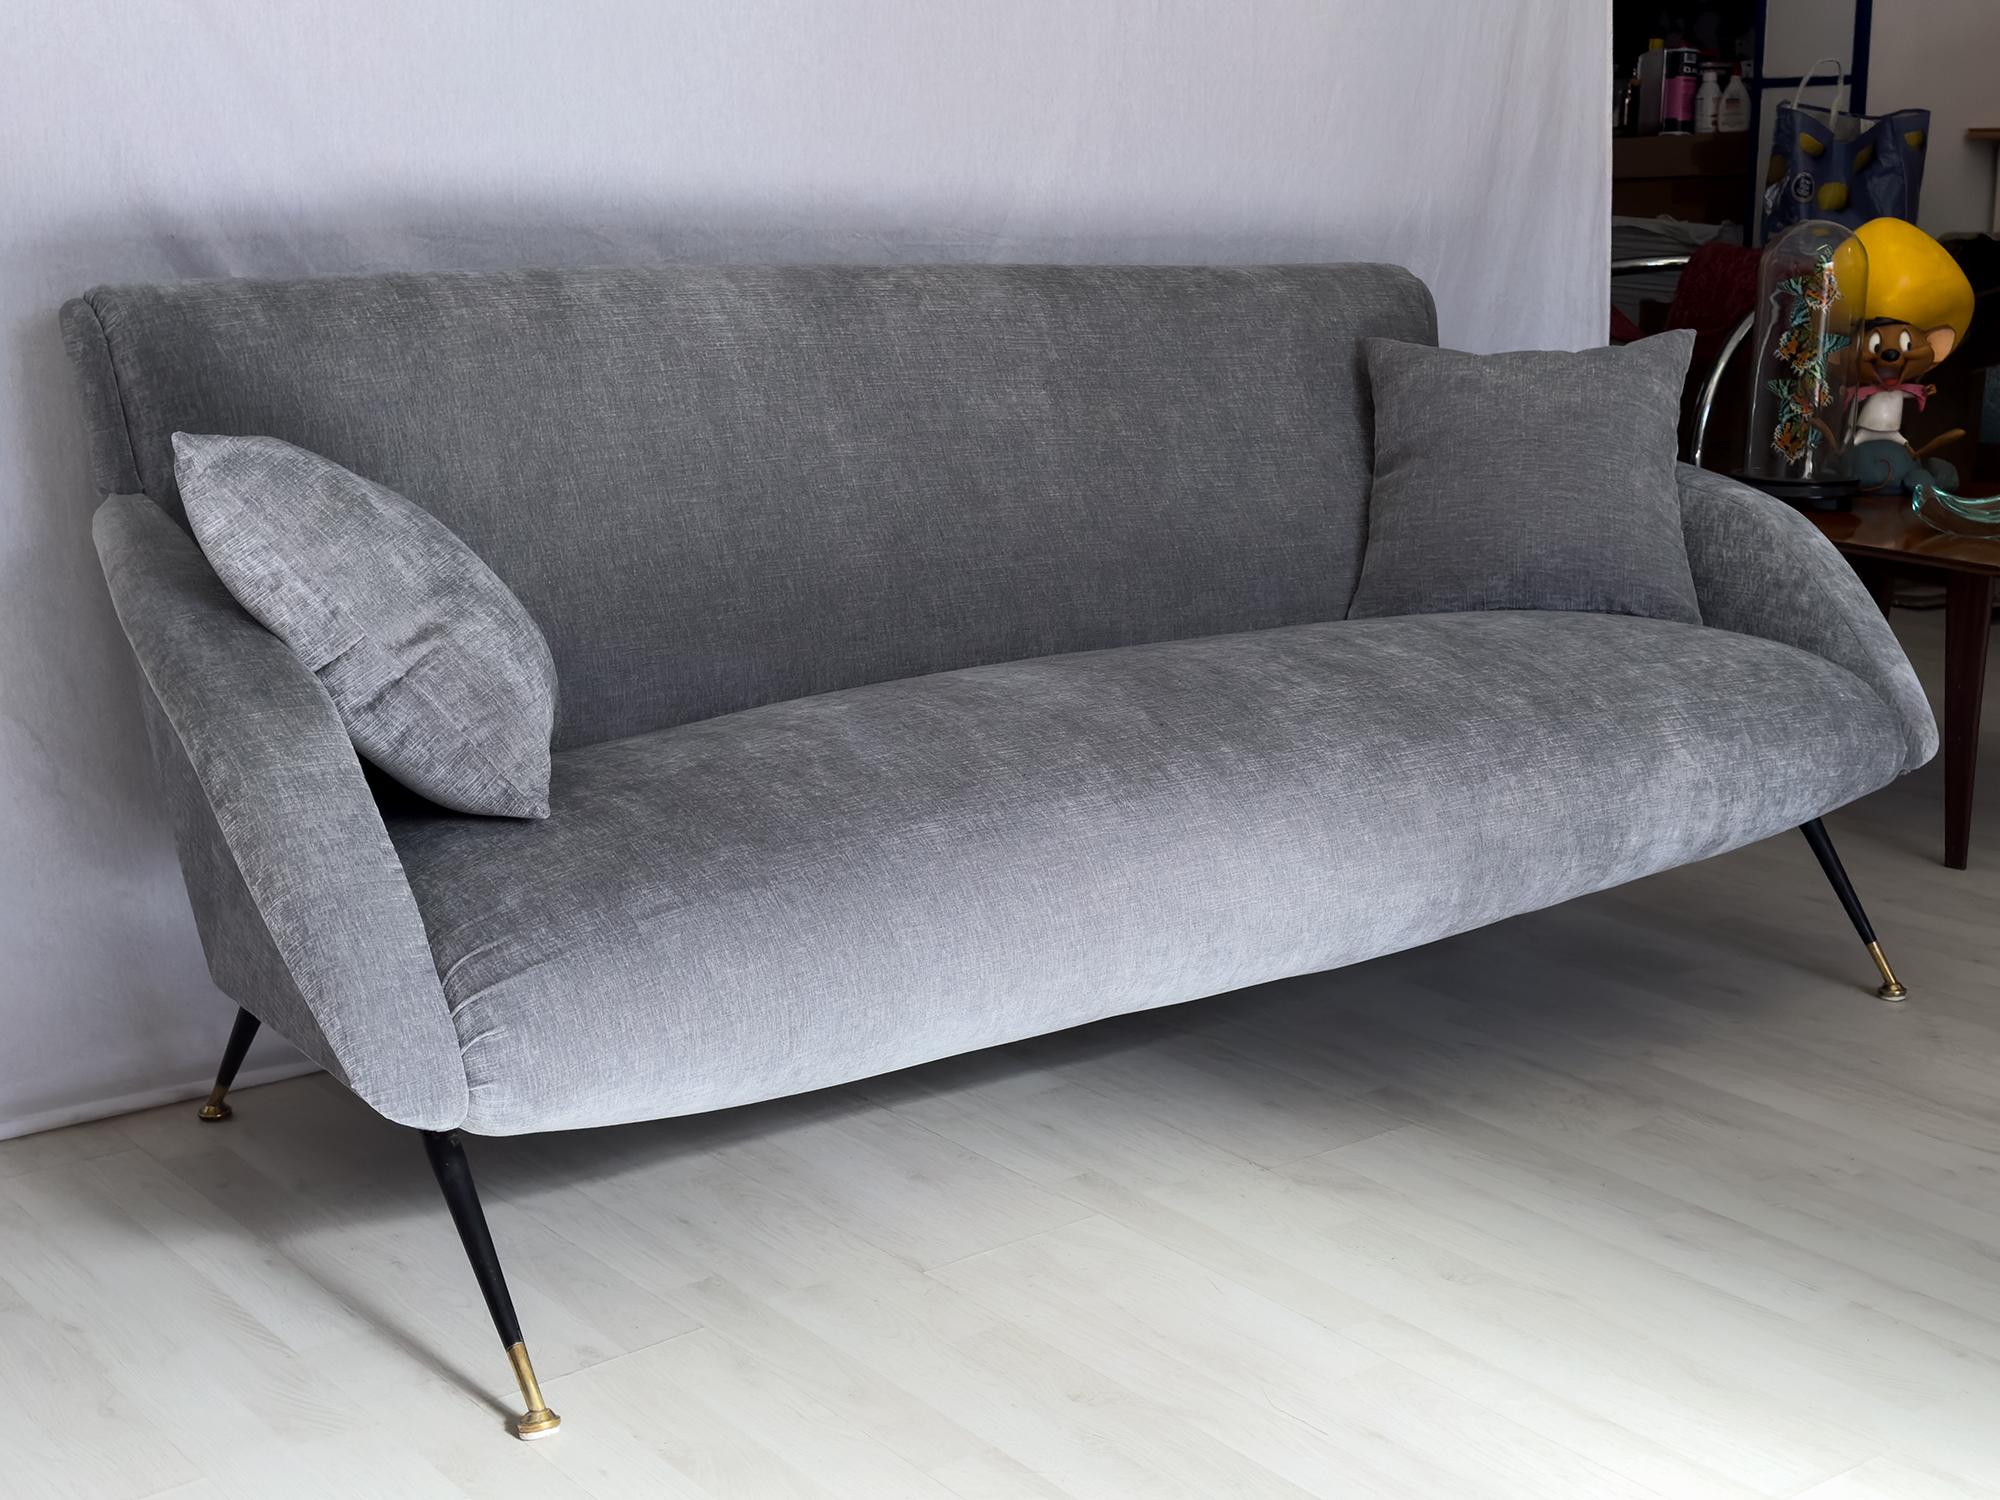 Stunning Italian midcentury three-seater sofa, with deep and very comfortable seating to provide a relaxing session.
The structure is very sturdy, supported by tapered black iron legs with brass feet, and it has been completely reupholstered with a